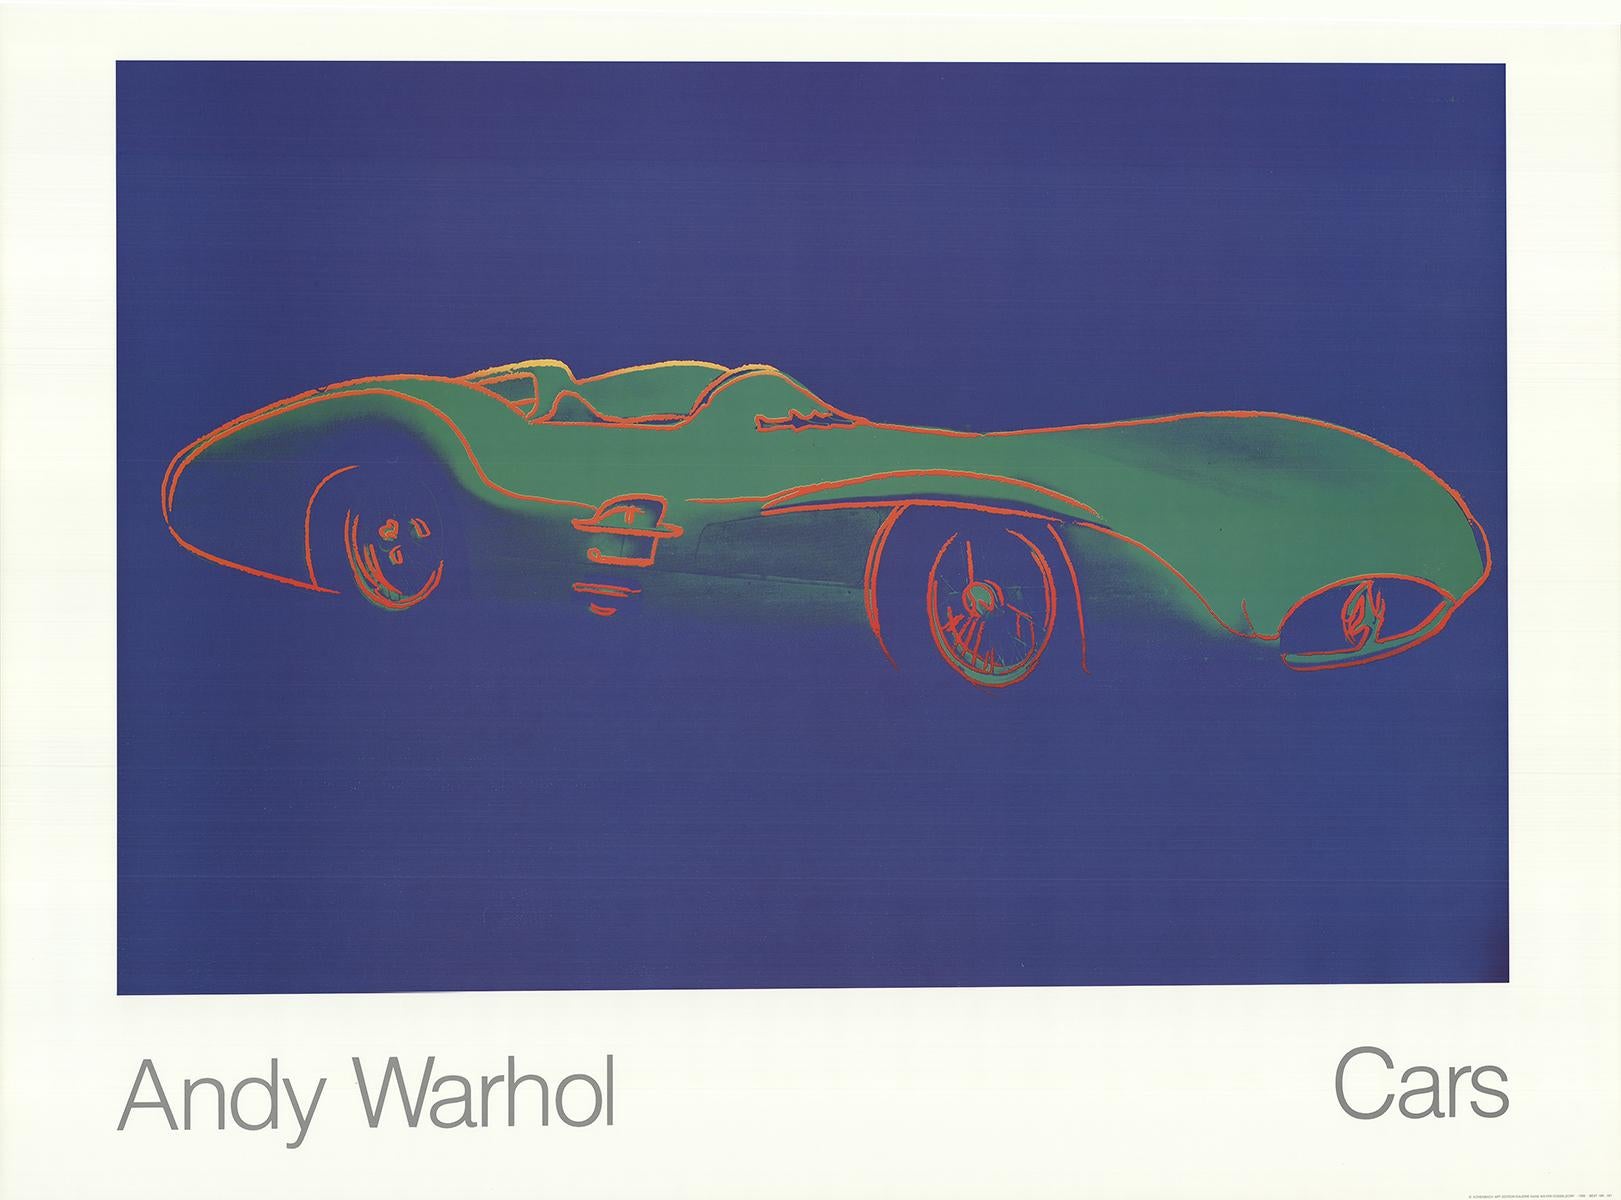 Oversized first edition printing published by Te Neues Publishing in Germany in 1989 of Warhol’s Formula 1 Car W196 R 1954.
